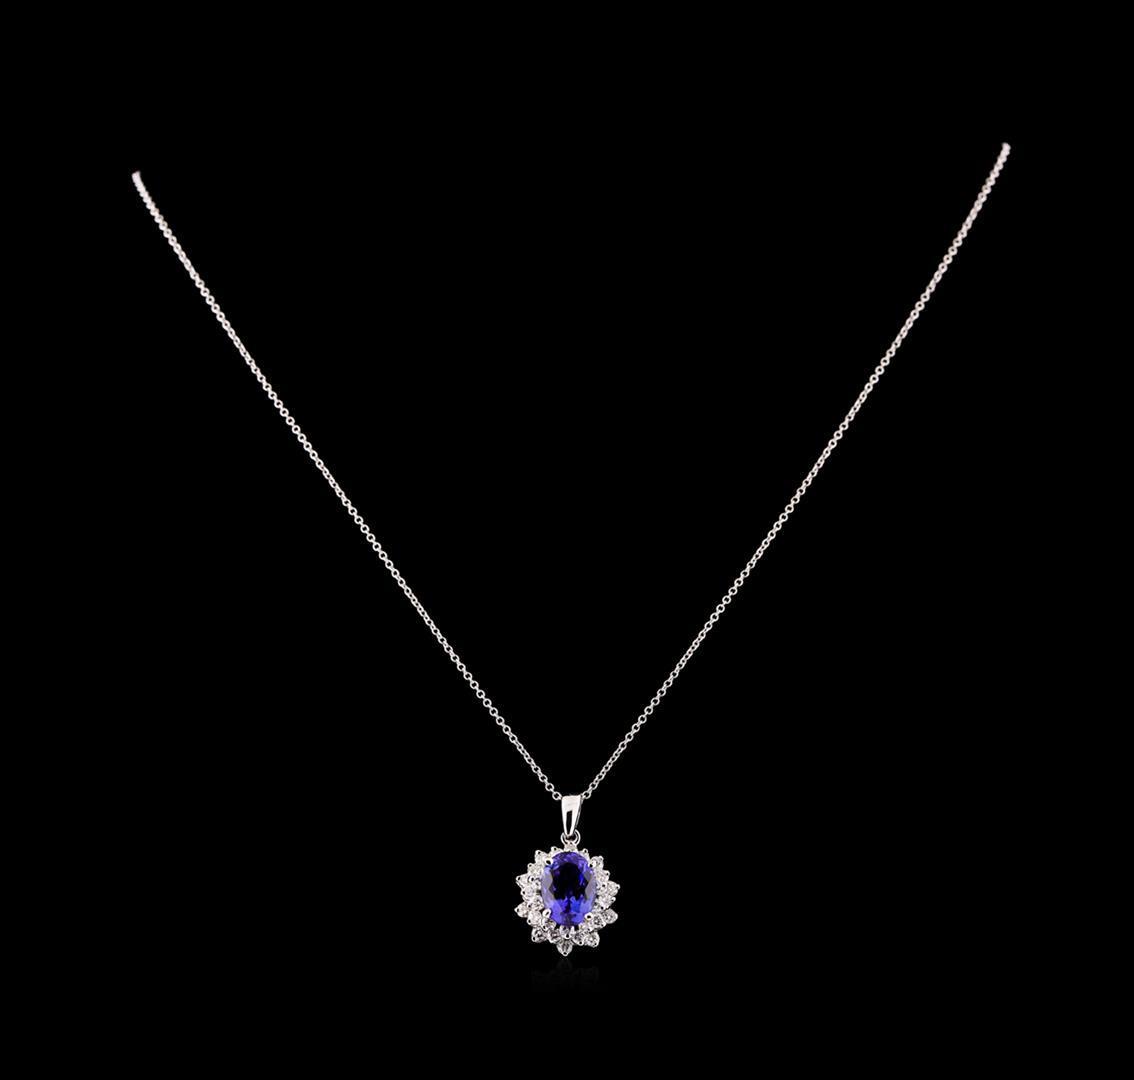 3.40 ctw Tanzanite and Diamond Pendant With Chain - 14KT White Gold